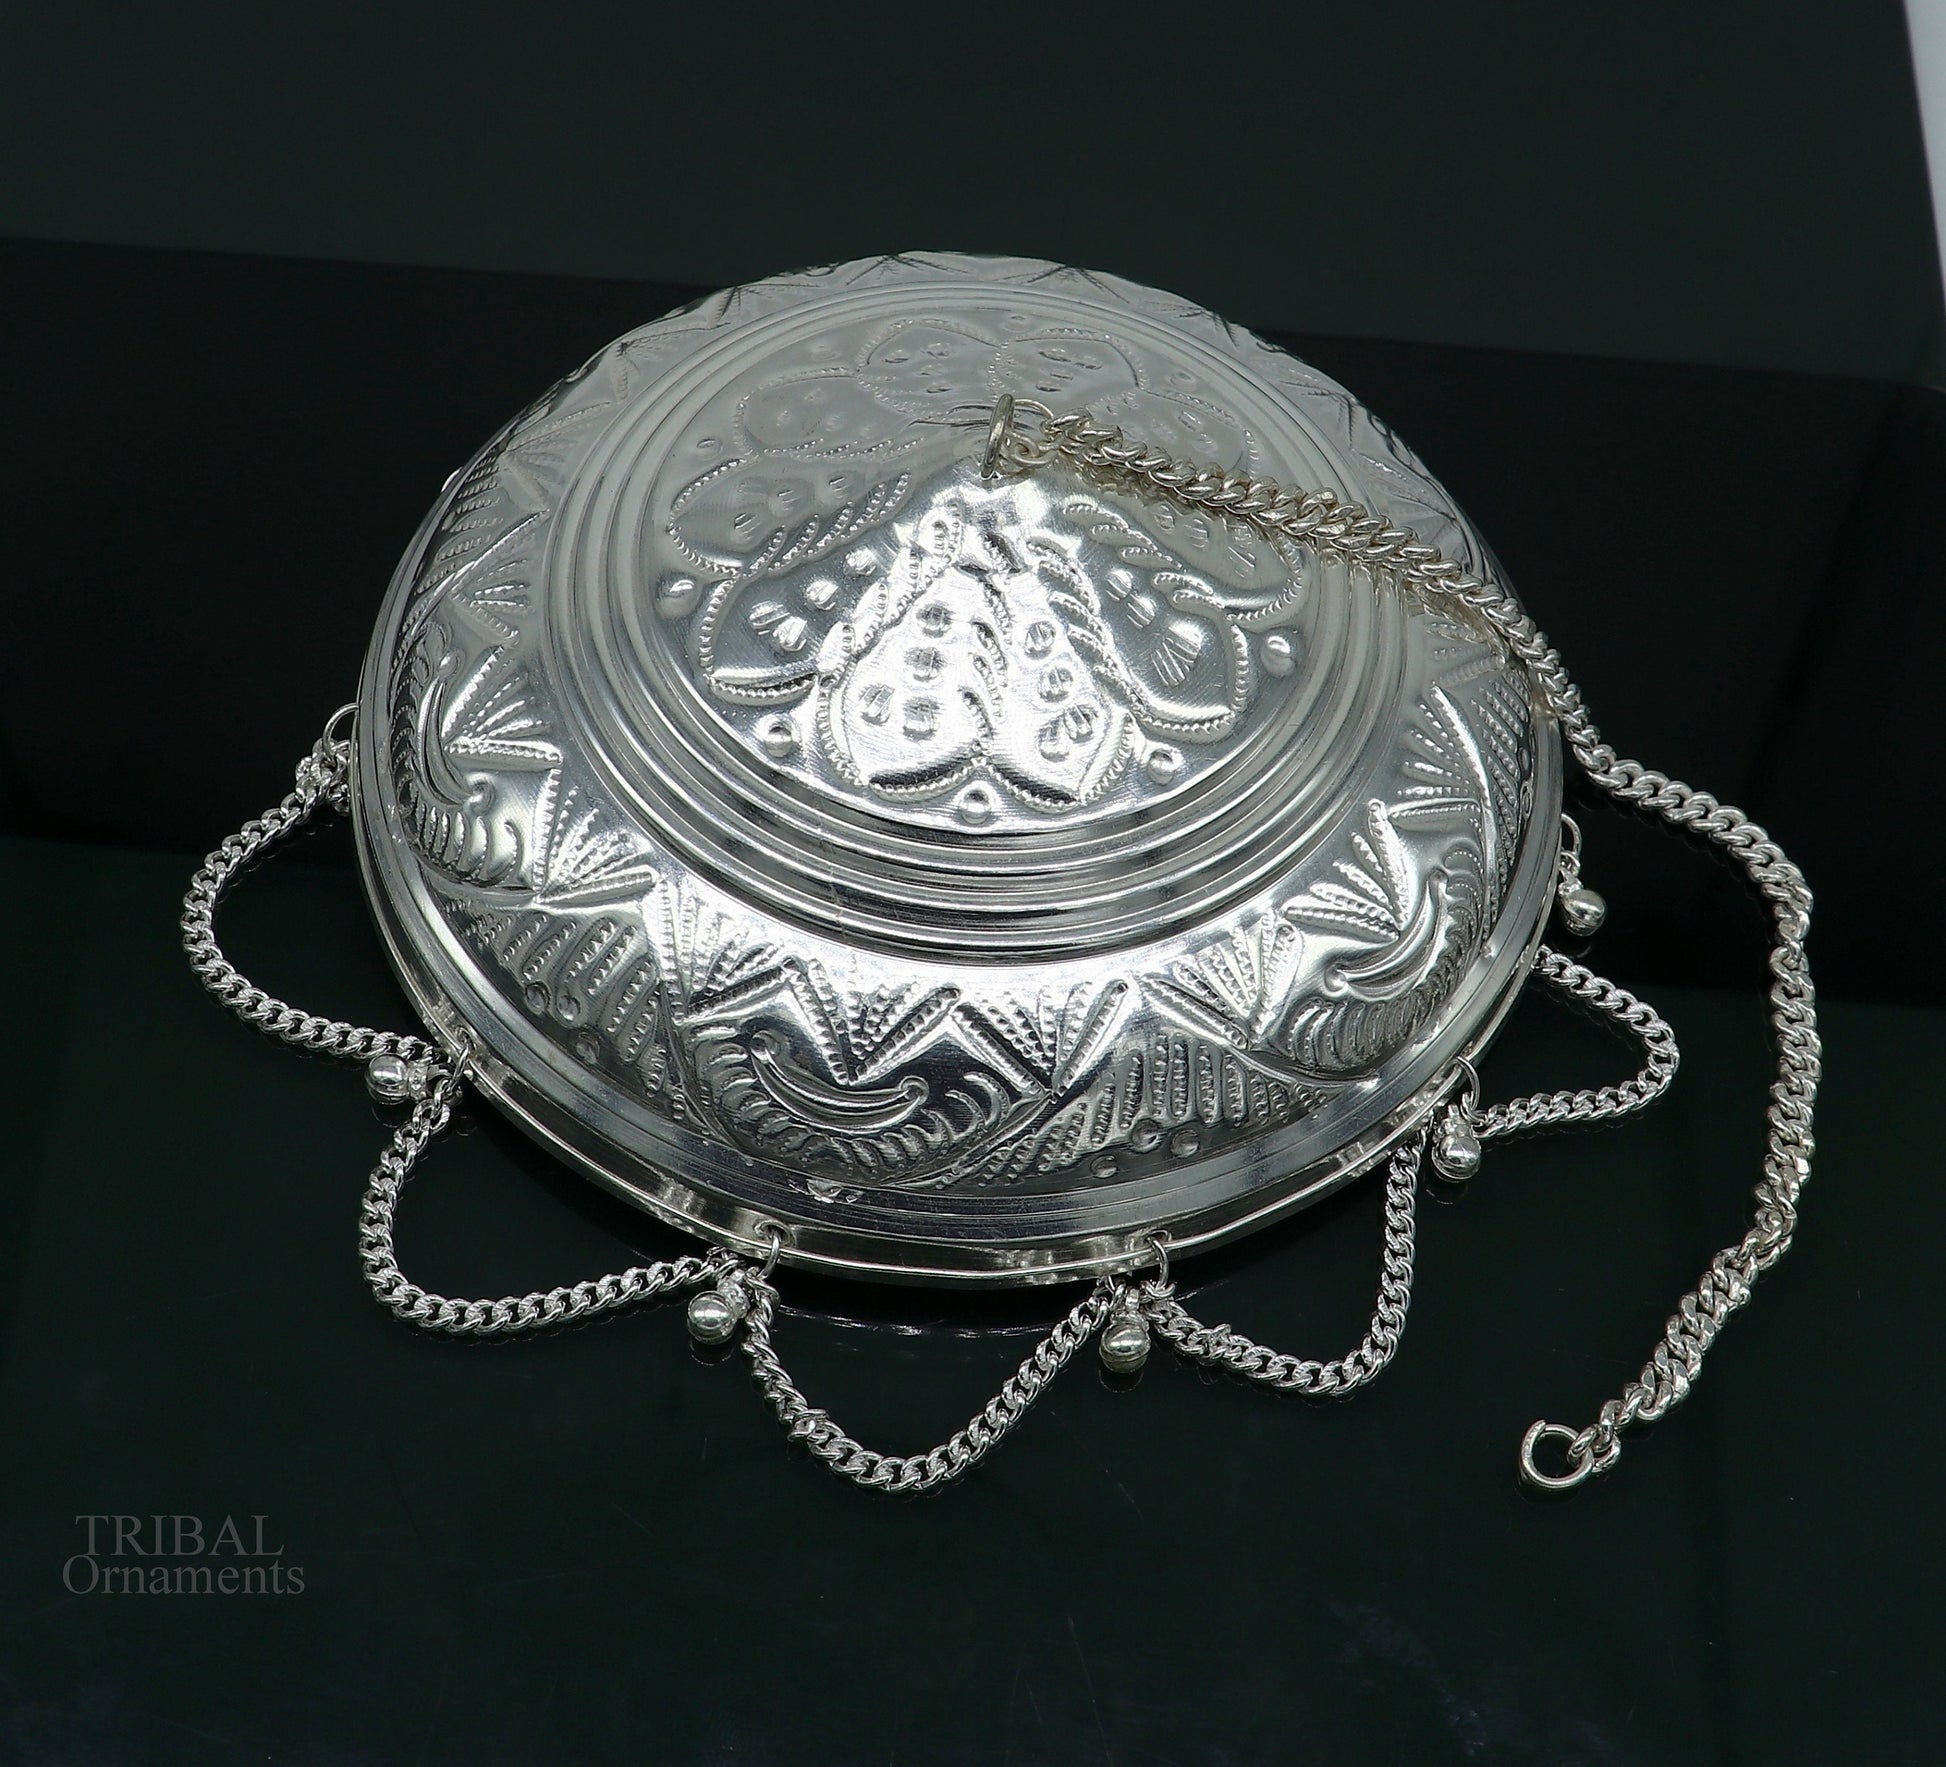 Solid Silver god chattar or chhatra, silver umbrella god temple art, hand craved sterling silver temple article, temple utensils su633 - TRIBAL ORNAMENTS